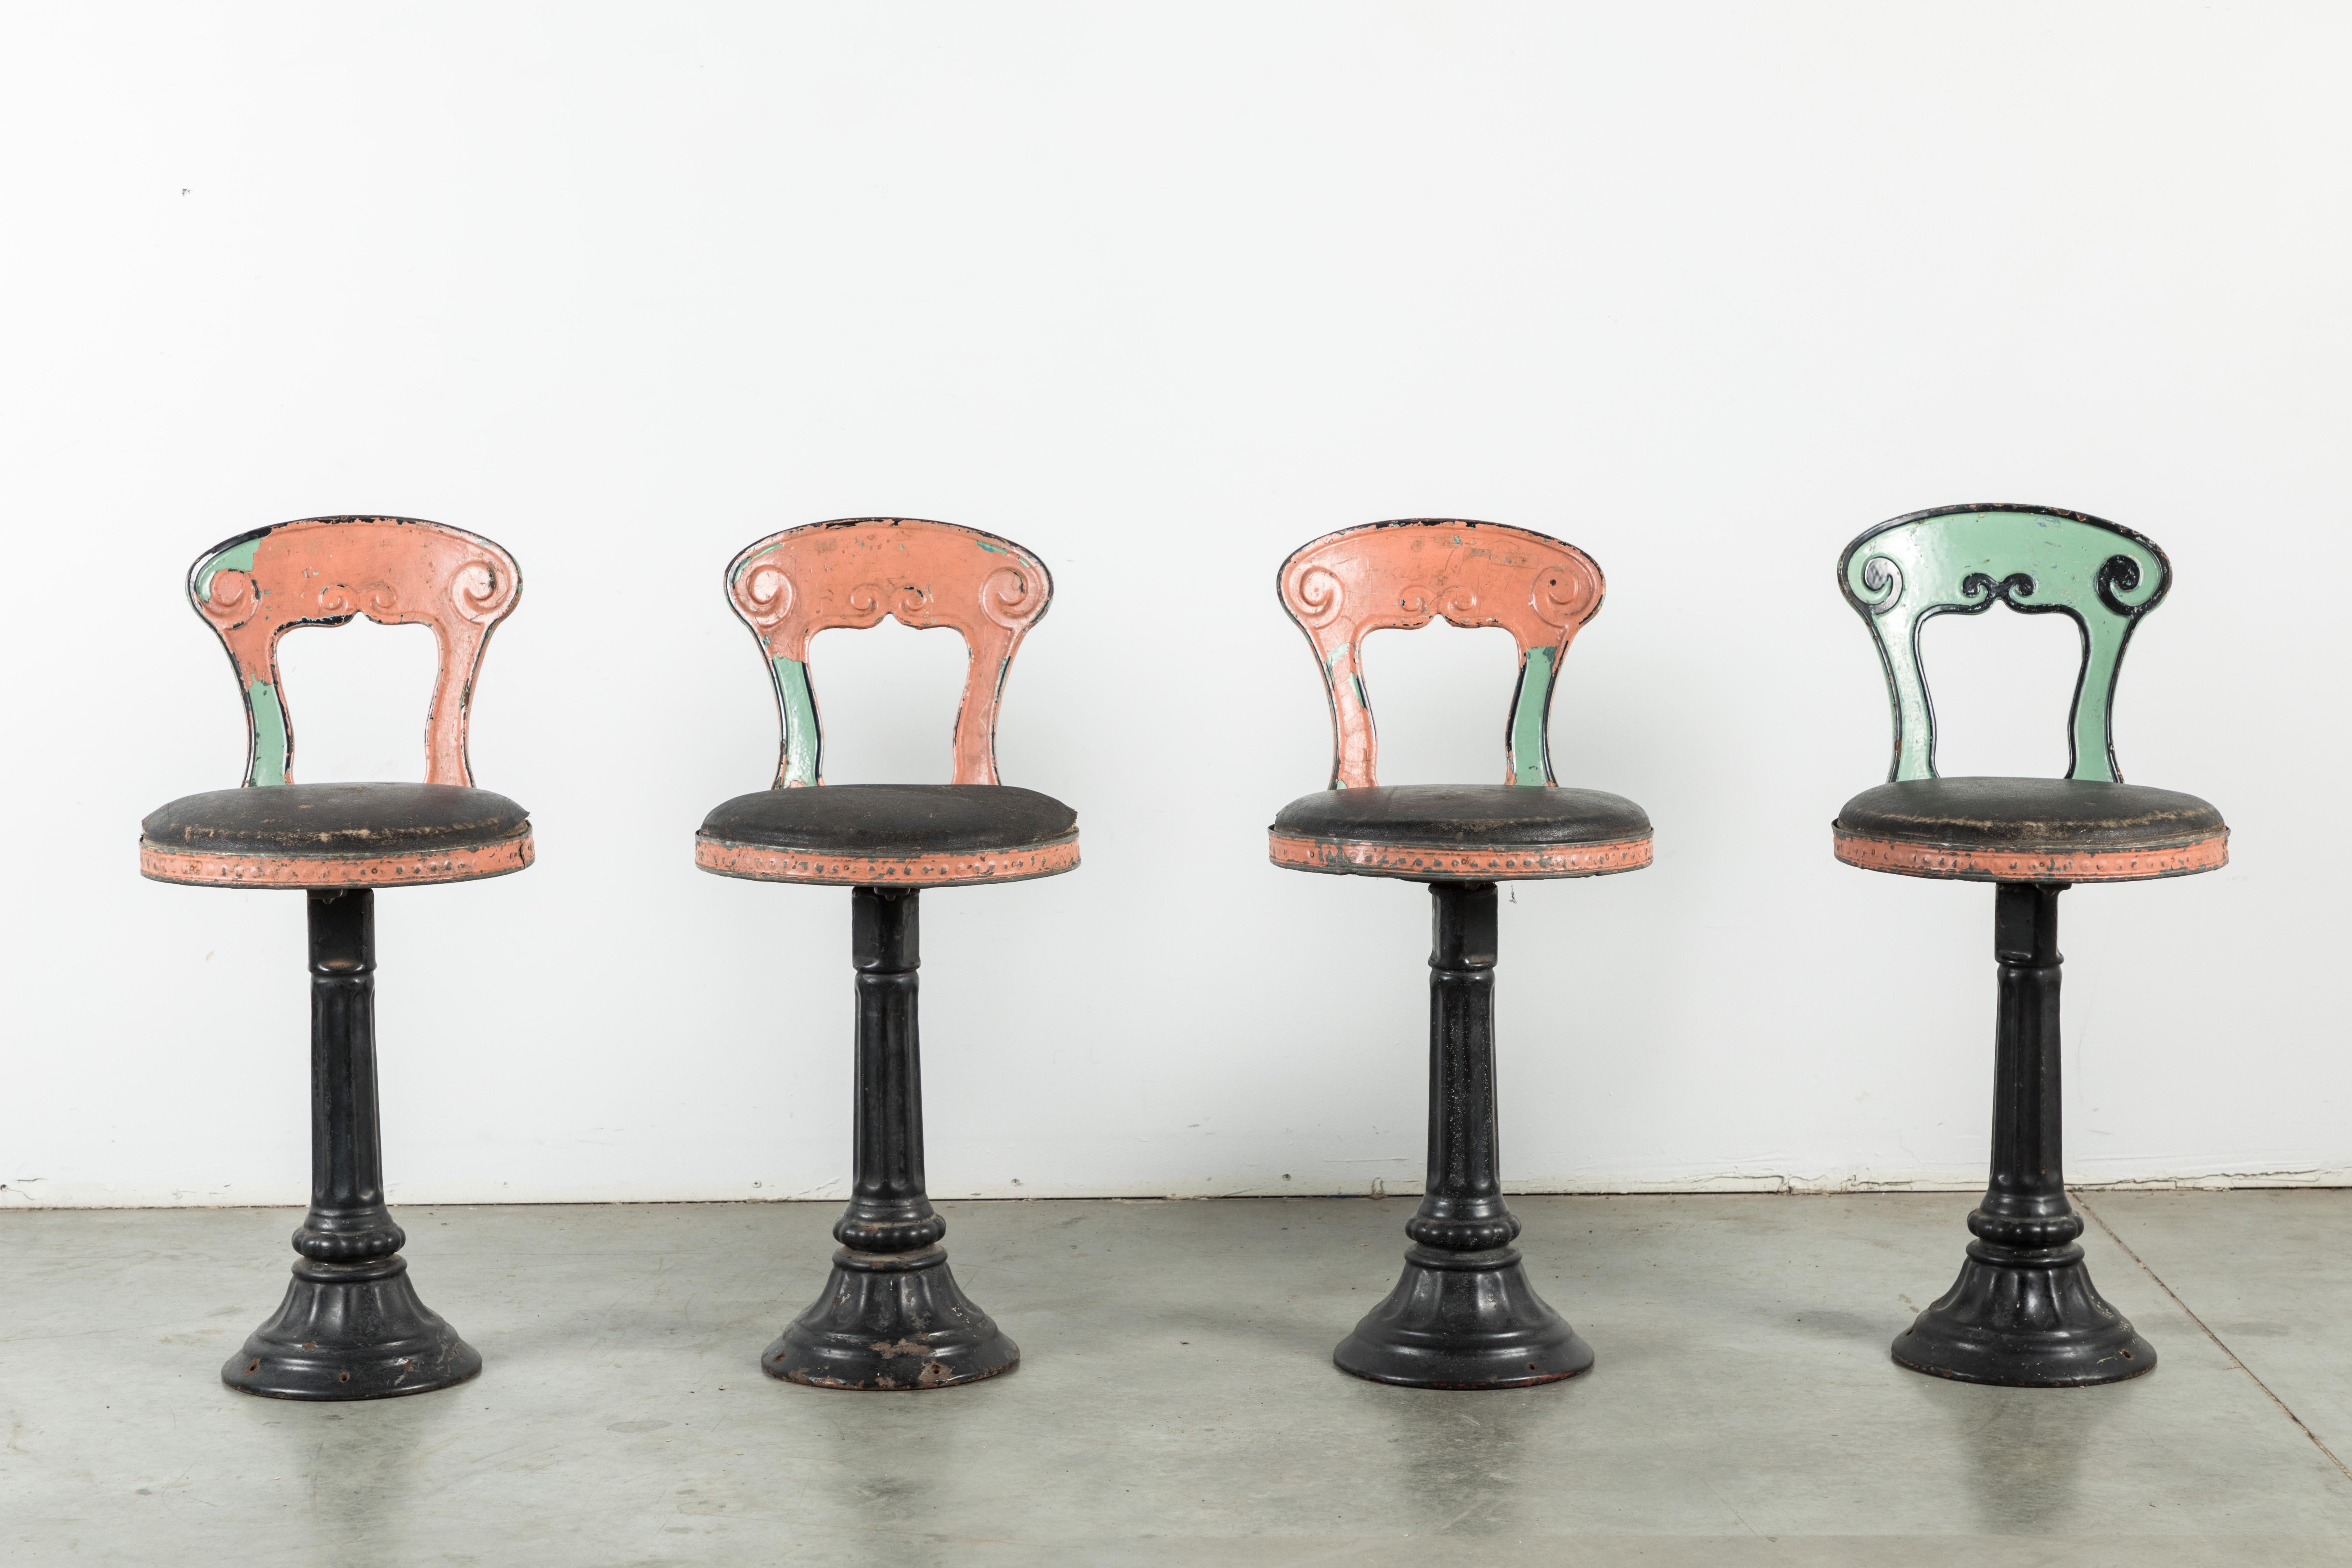 Great set of four cast iron soda fountain chairs. Found in the northeast. Original multi layer pink and green paint surface. Also original leather chair surface. Very nice cast iron bases.